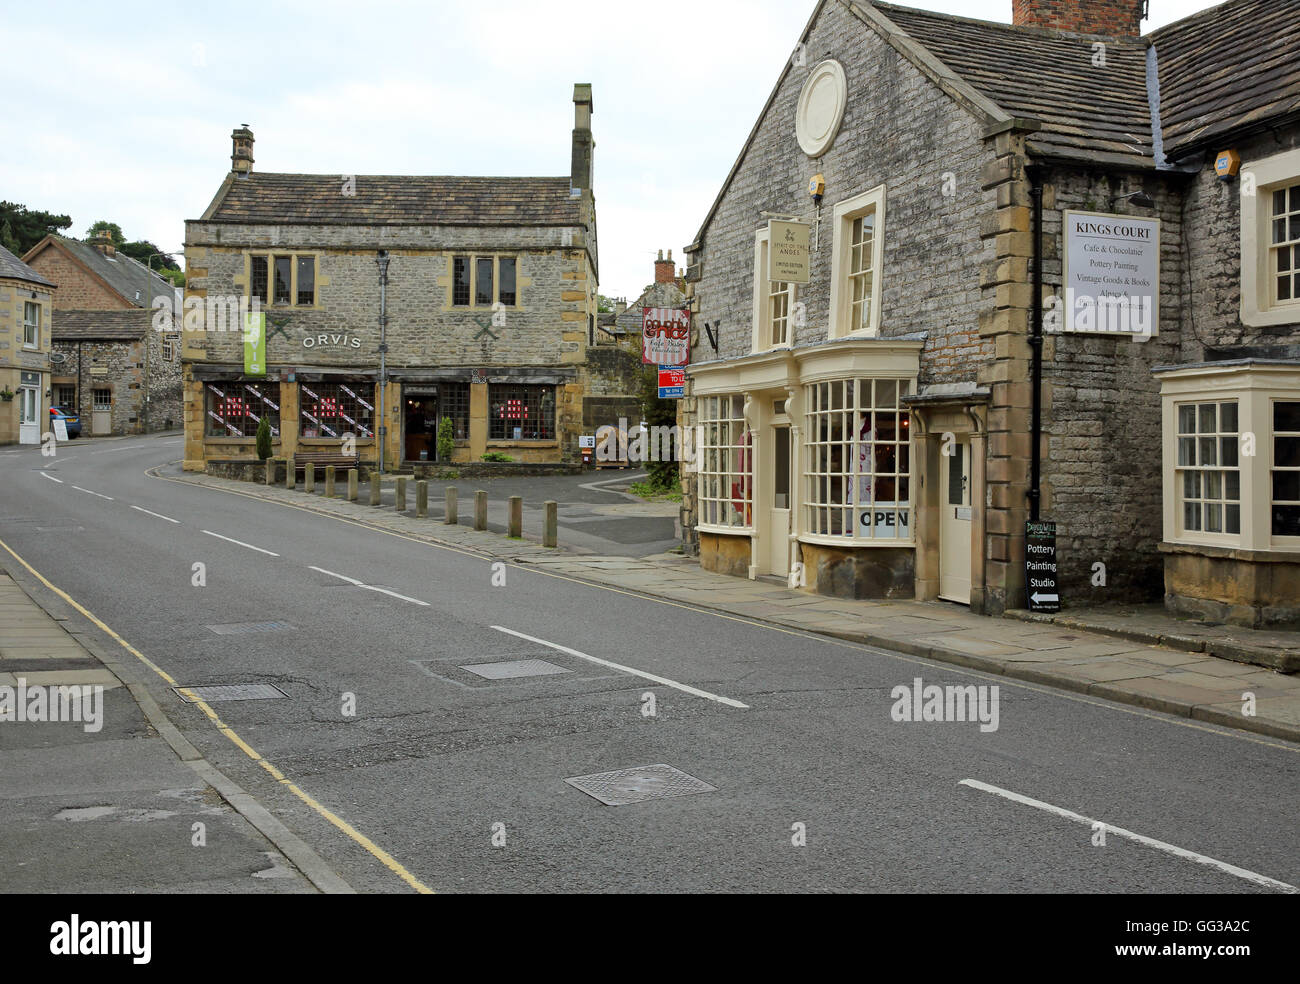 Shops in traditional stone buildings in the ancient Market town of Bakewell, Derbyshire, England. Stock Photo